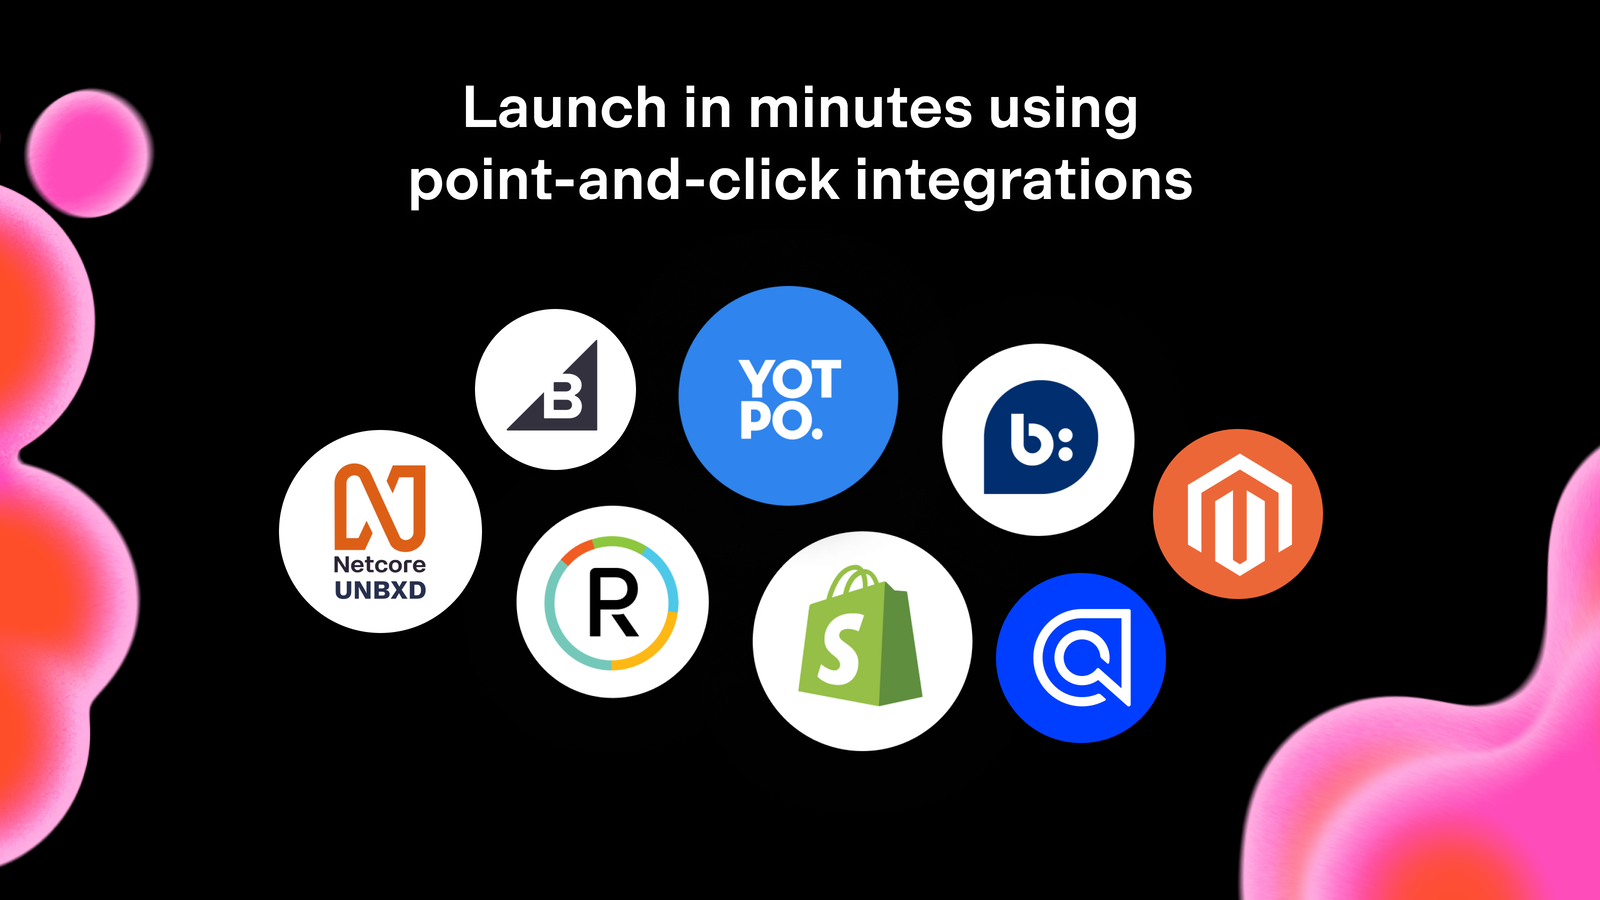 Launch in minutes using point-and-click integrations